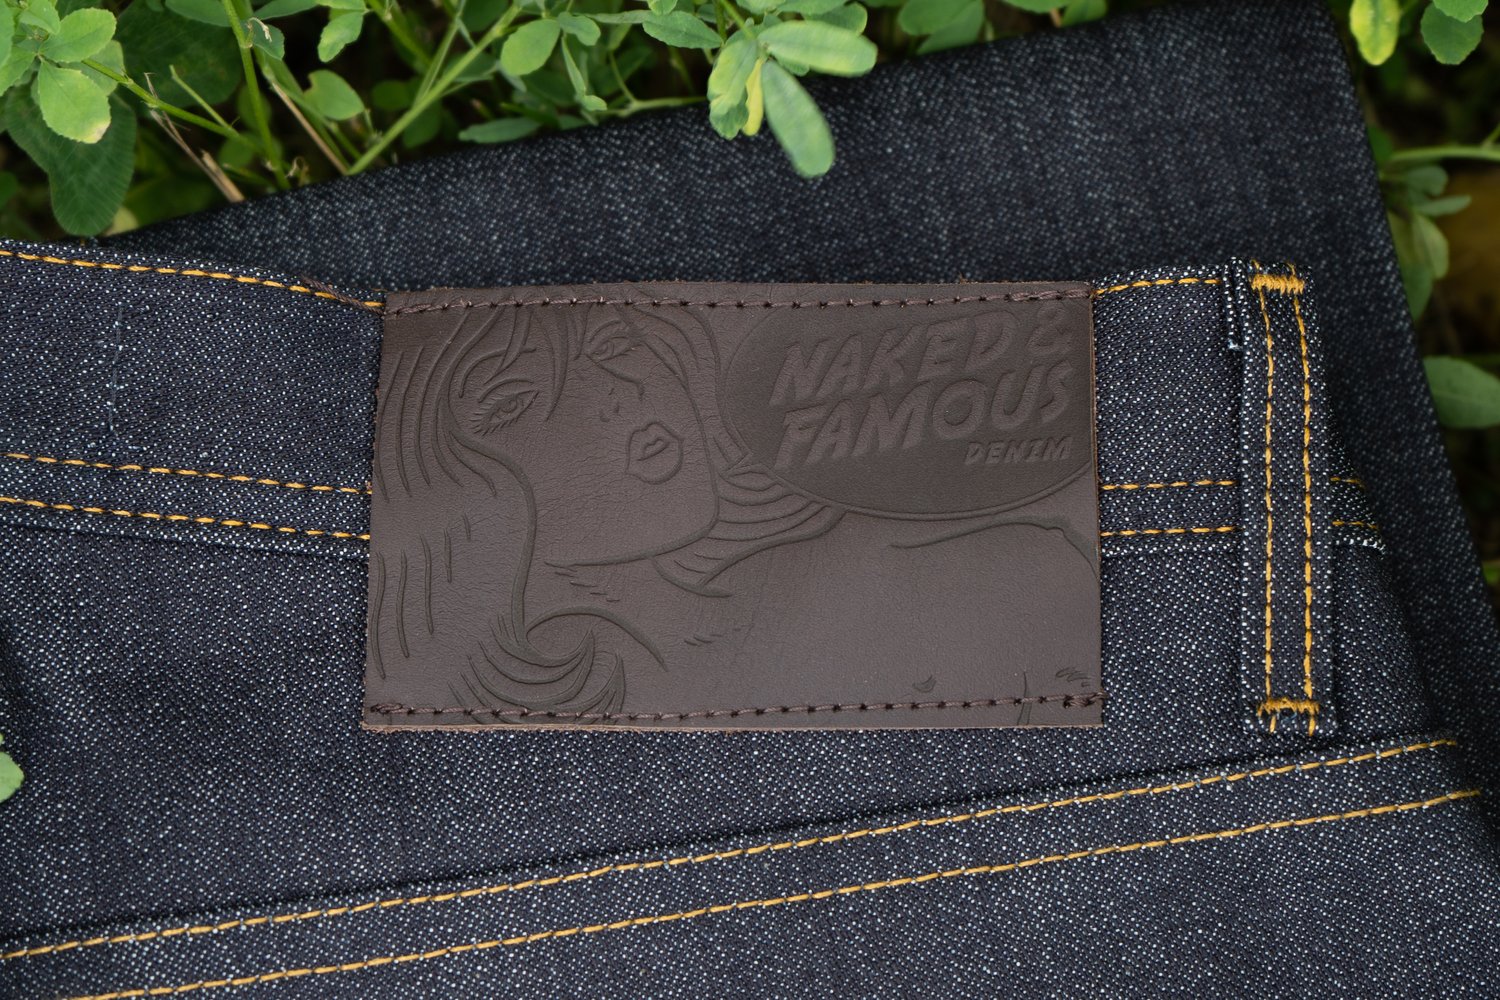 Offshoot Broken Twill Selvedge - Leather Patch